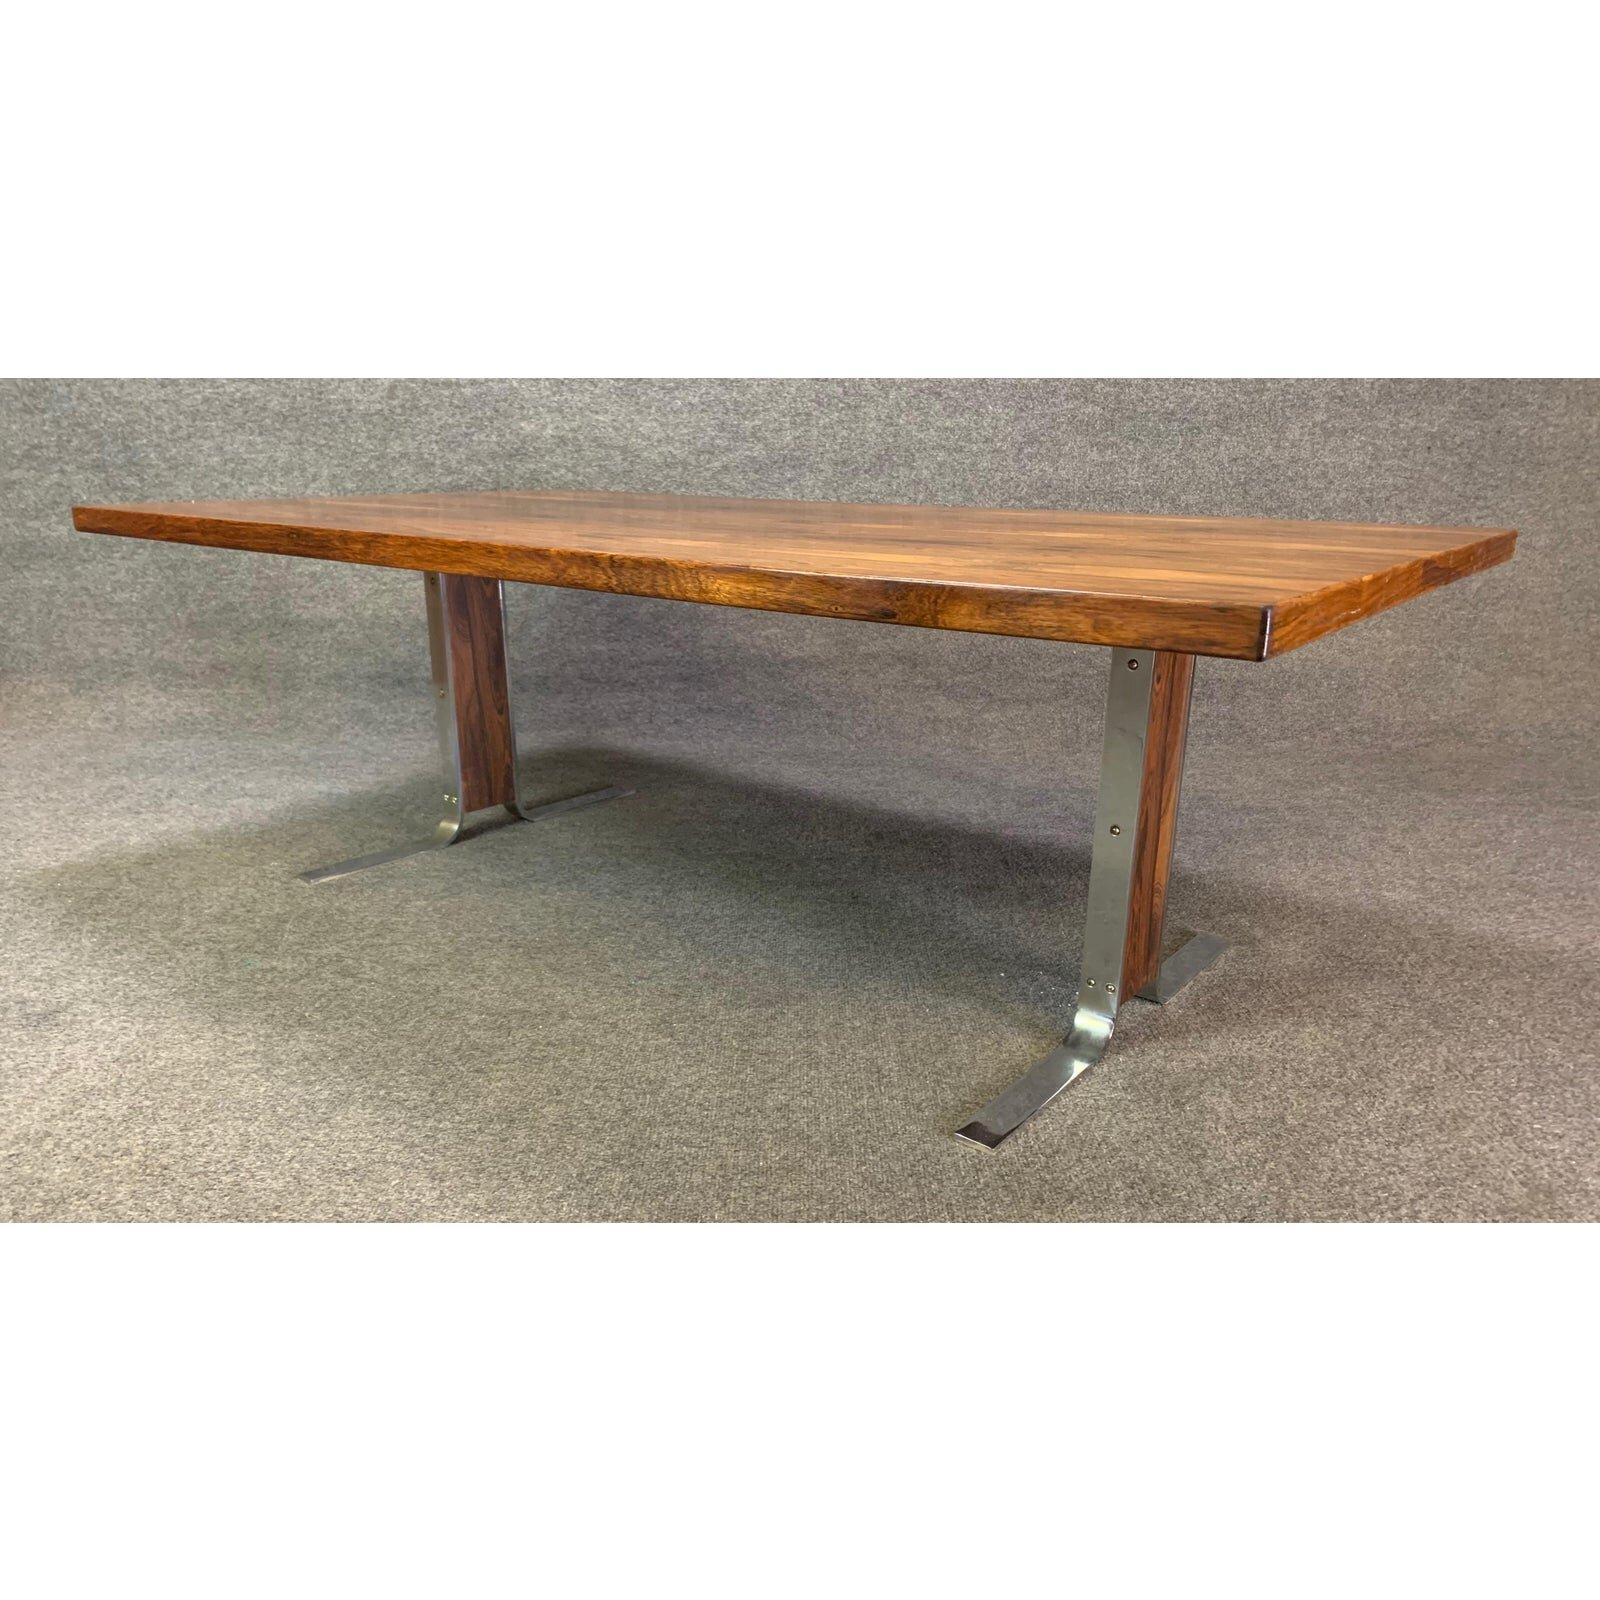 Here is a large Scandinavian modern coffee table in rosewood and chrome accent manufactured in Denmark in the 1970''s.
This coffee table, in its original condition, features a large top with vibrant wood grain and two pedestal polished chrome legs